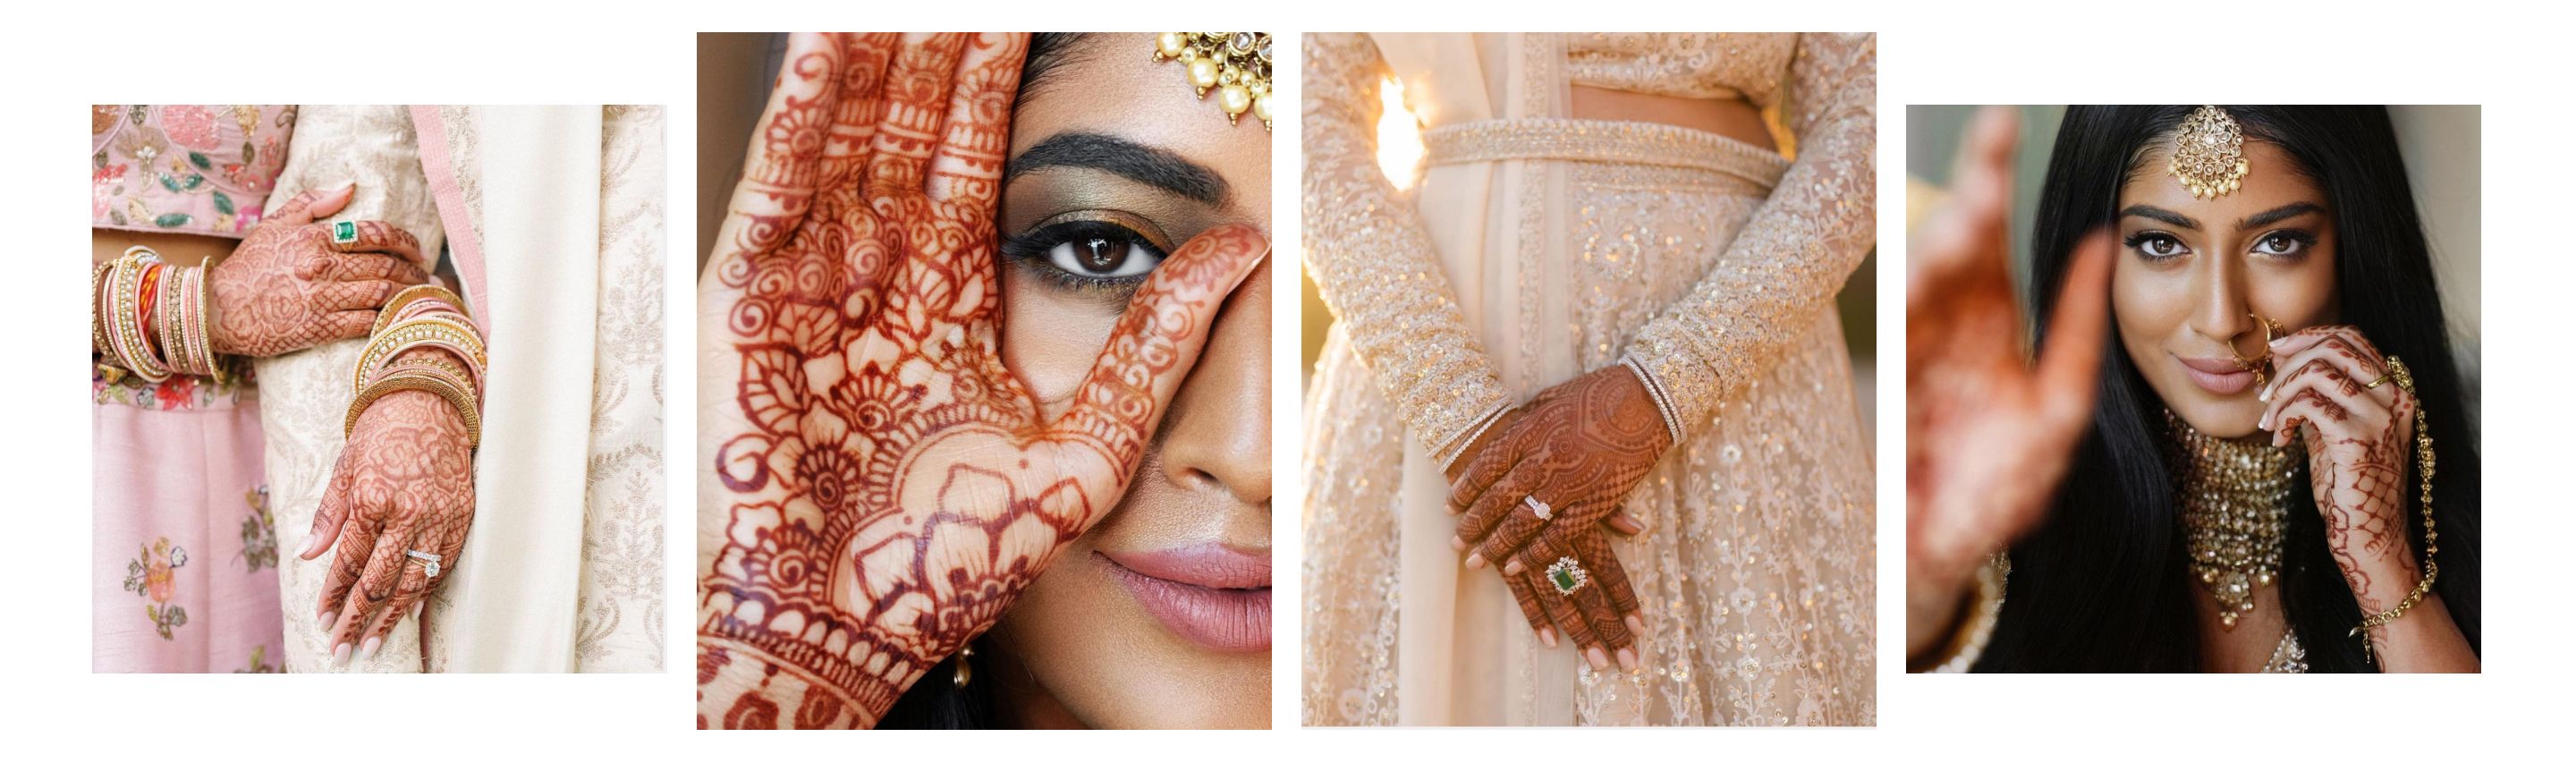 An Artist Who Paints Brides With Elaborate Henna Designs - WSJ